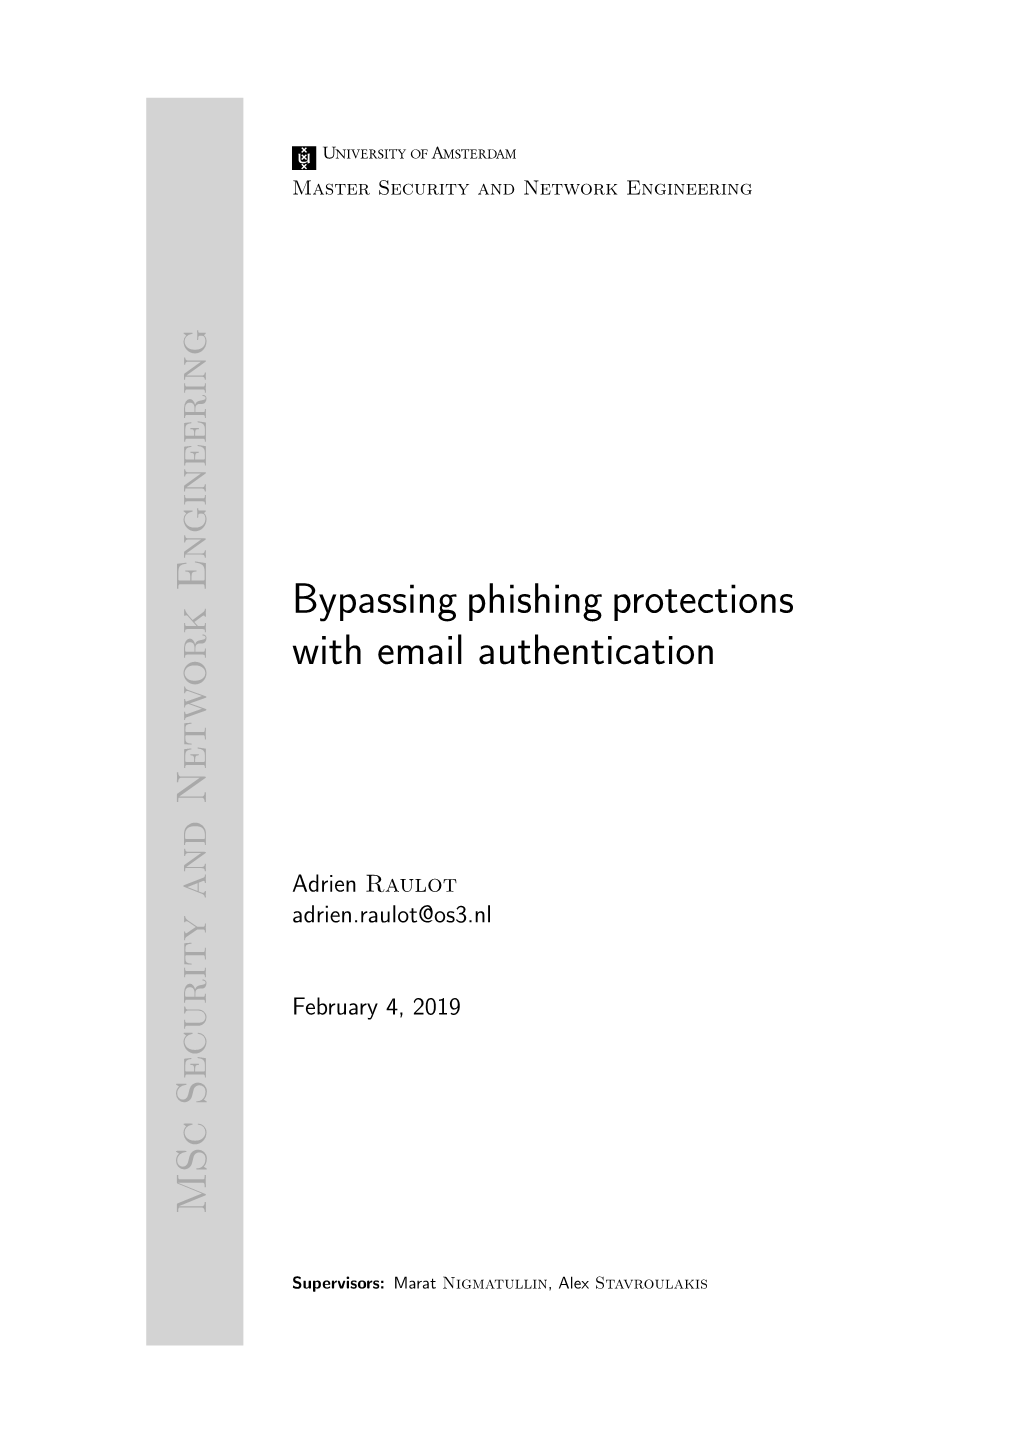 Bypassing Phishing Protections with Email Authentication